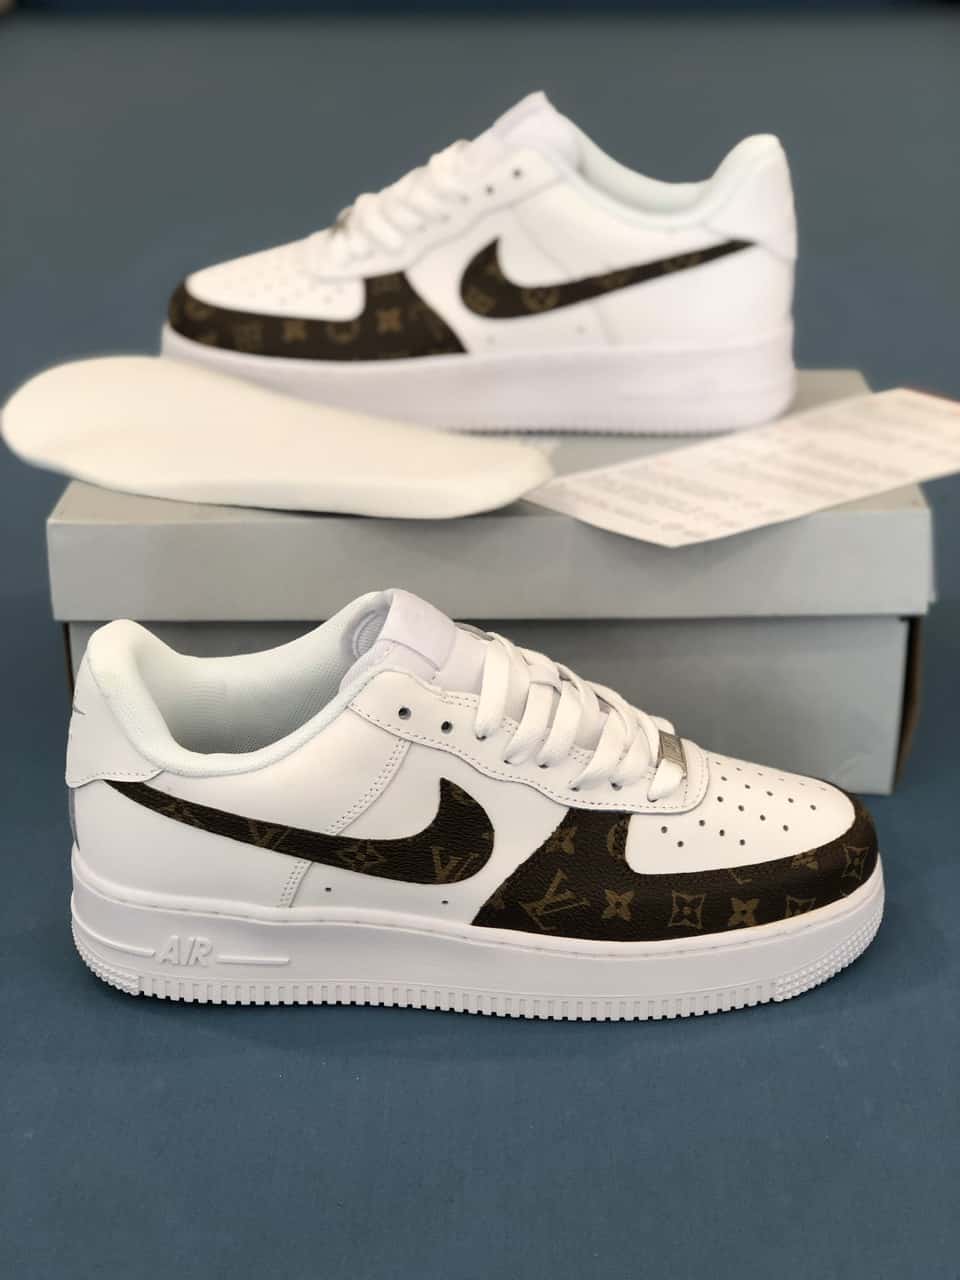 Louis Vuitton Nike Air Force 1 Release Time Price Raffle